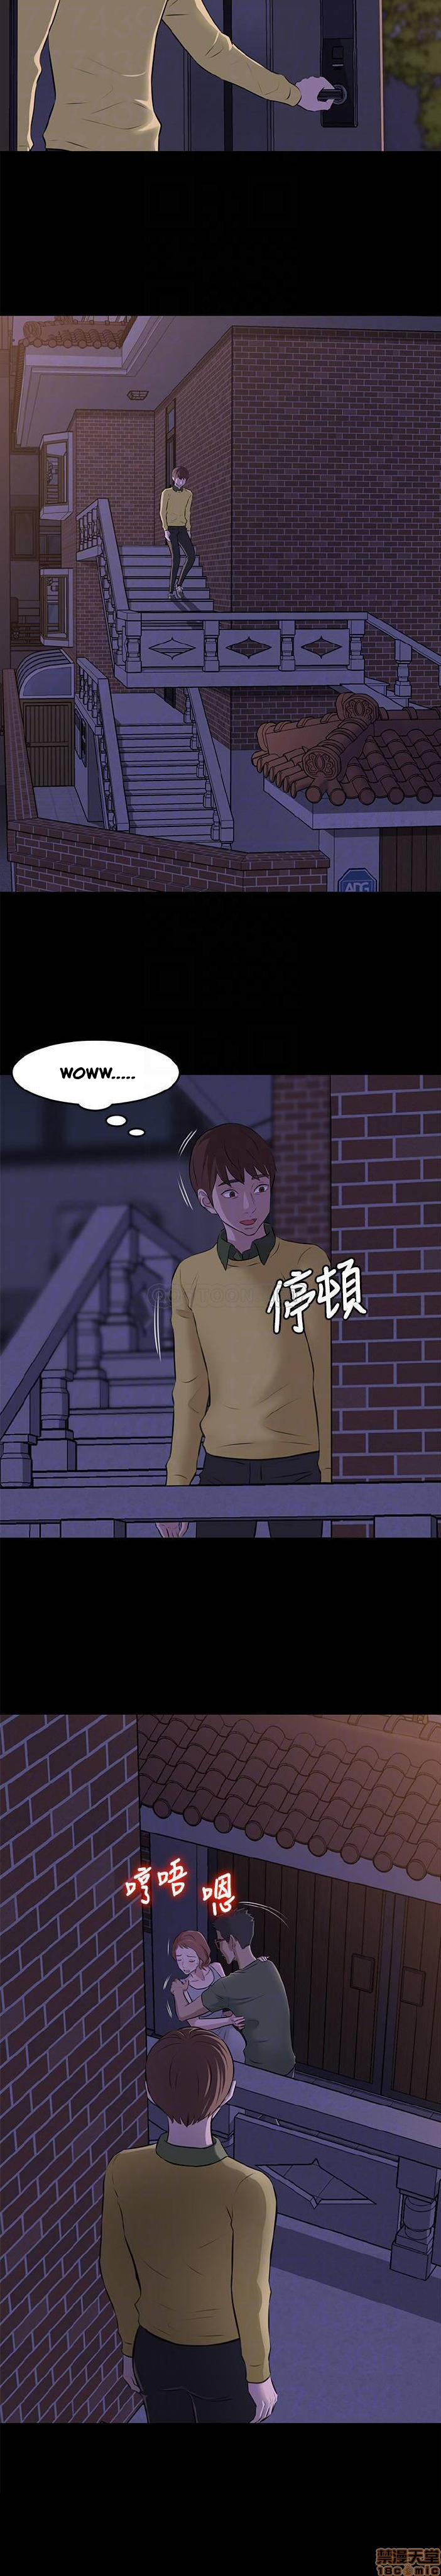 Chapter 002 : Chapter 02 ảnh 9